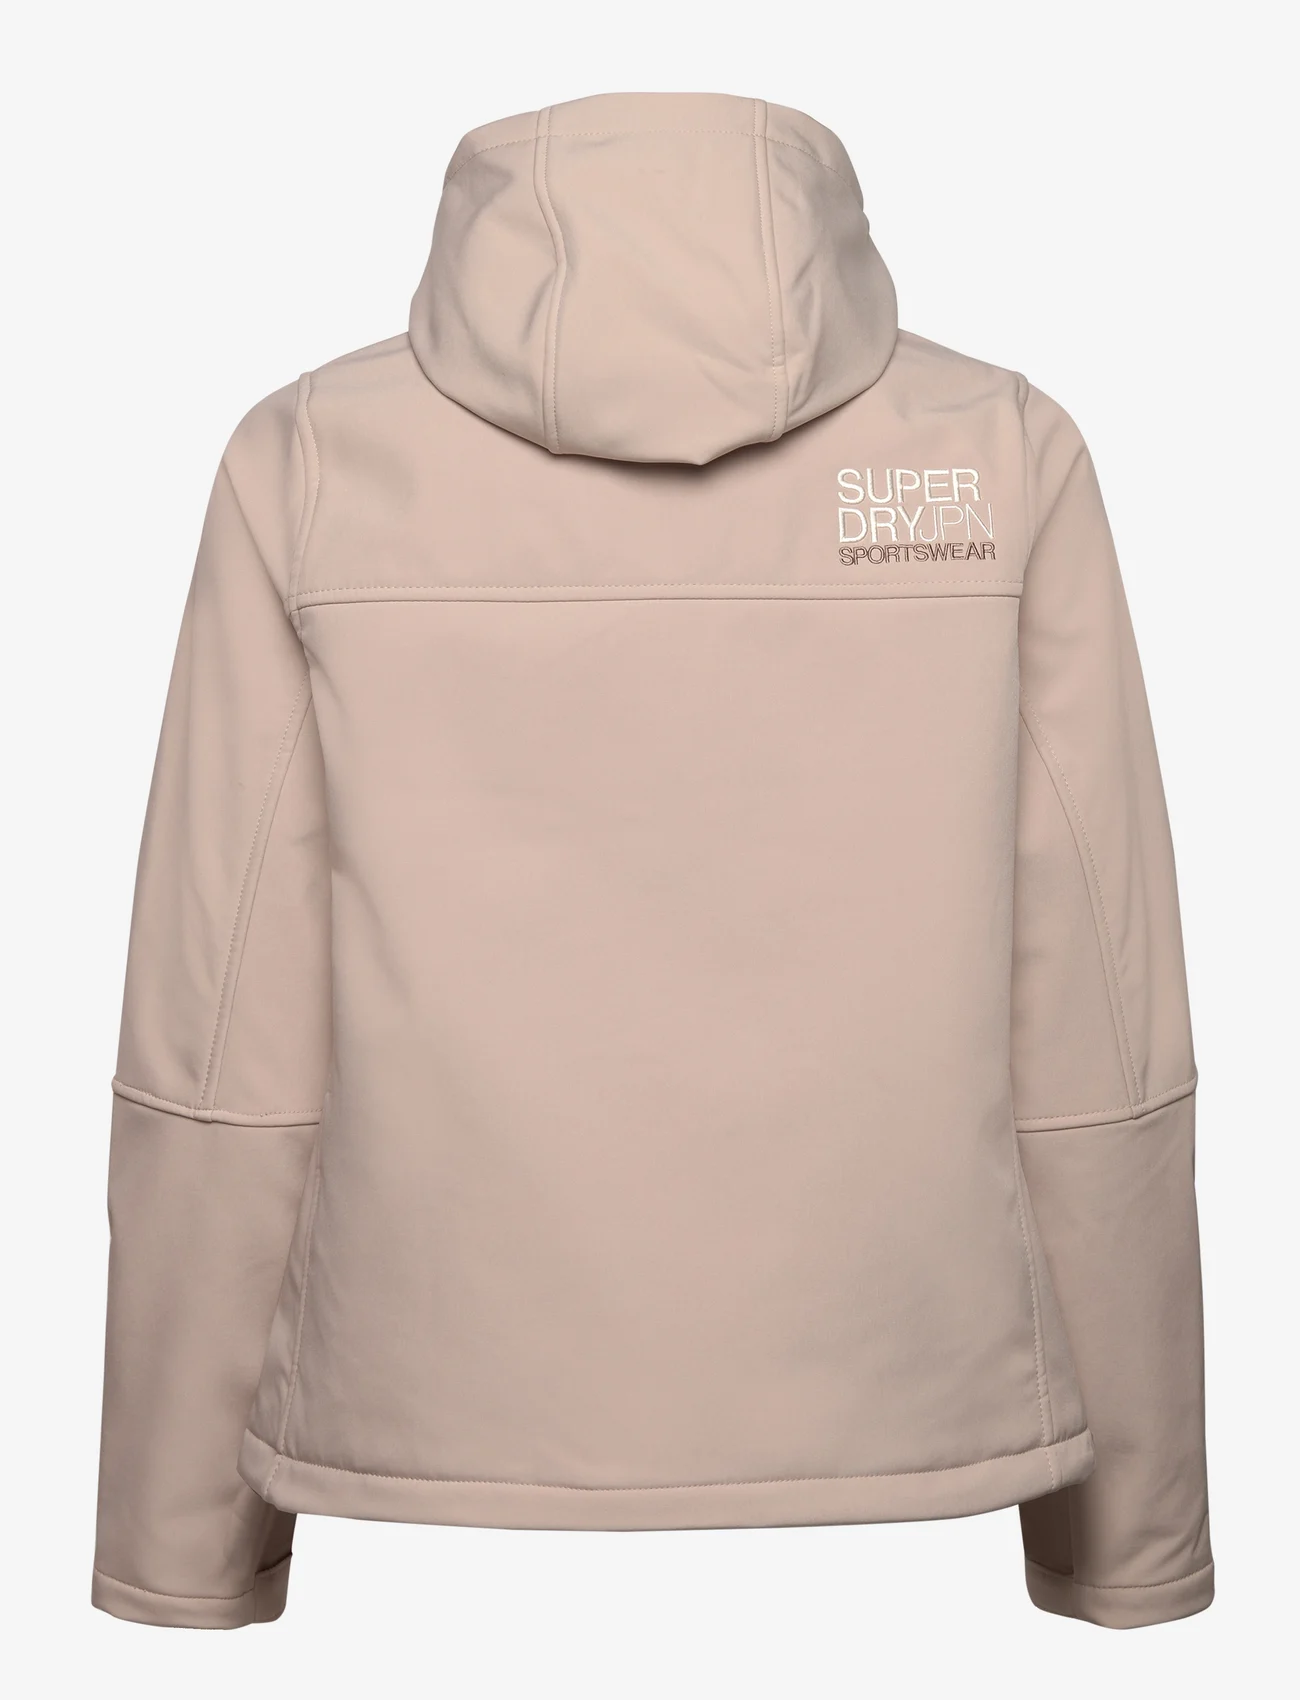 Superdry Sport - HOODED SOFTSHELL JACKET - toppatakit - chateau grey - 1